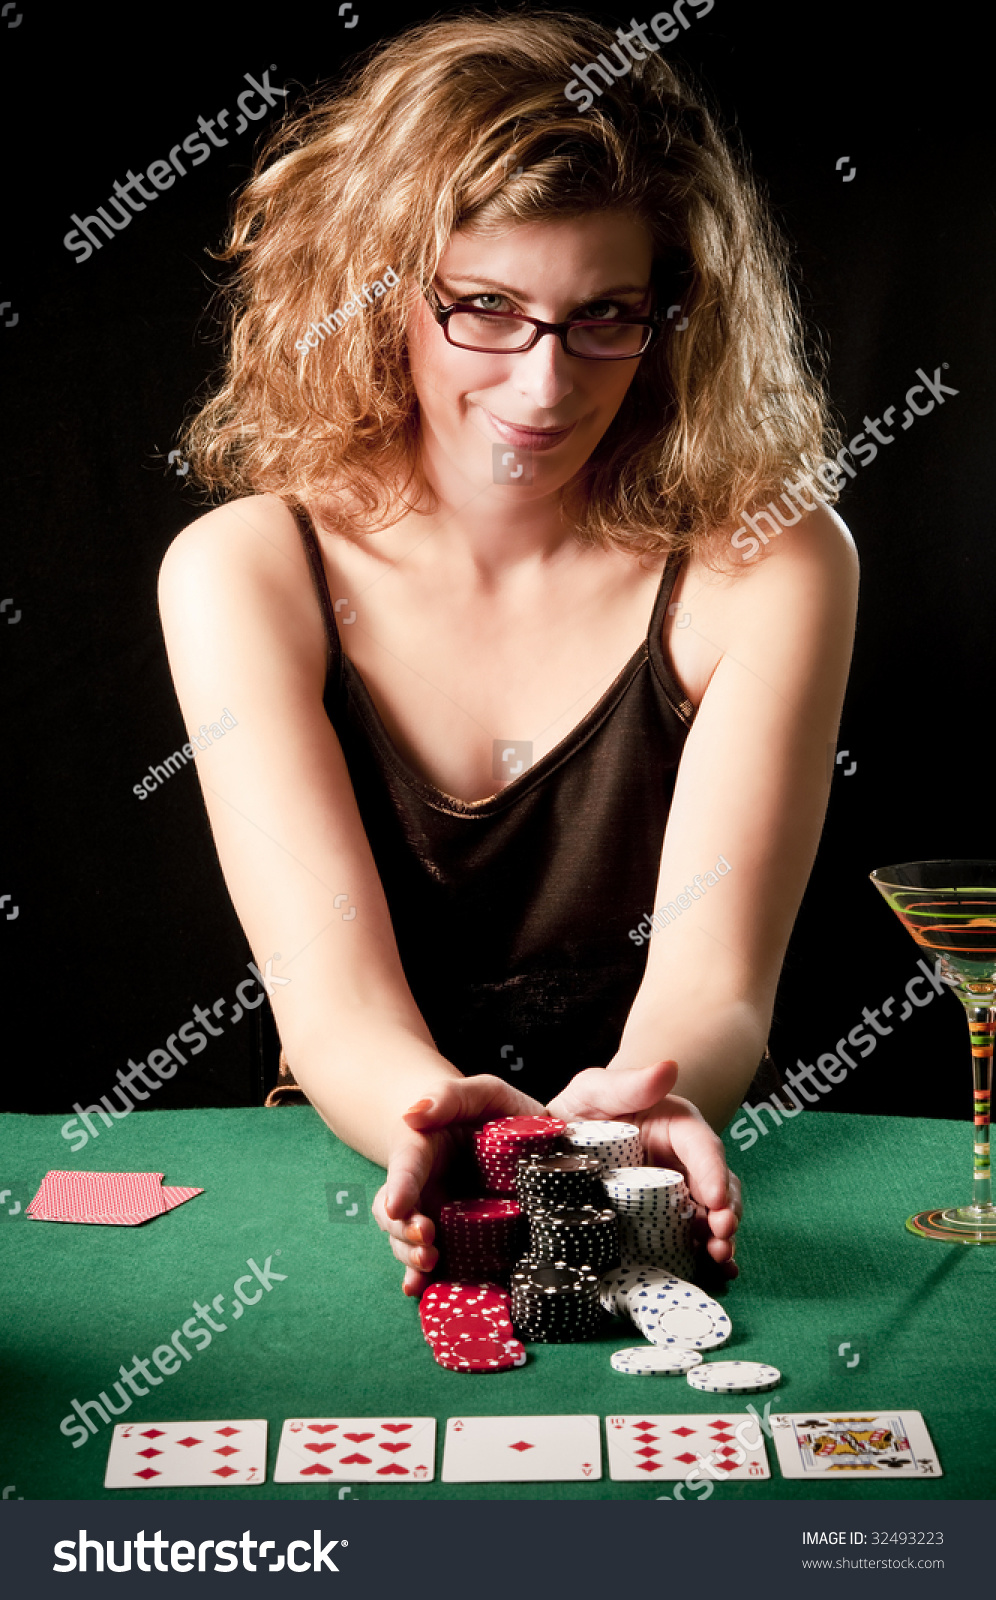 Woman Doing All-In Playing Poker Stock Photo 32493223 : Shutterstock